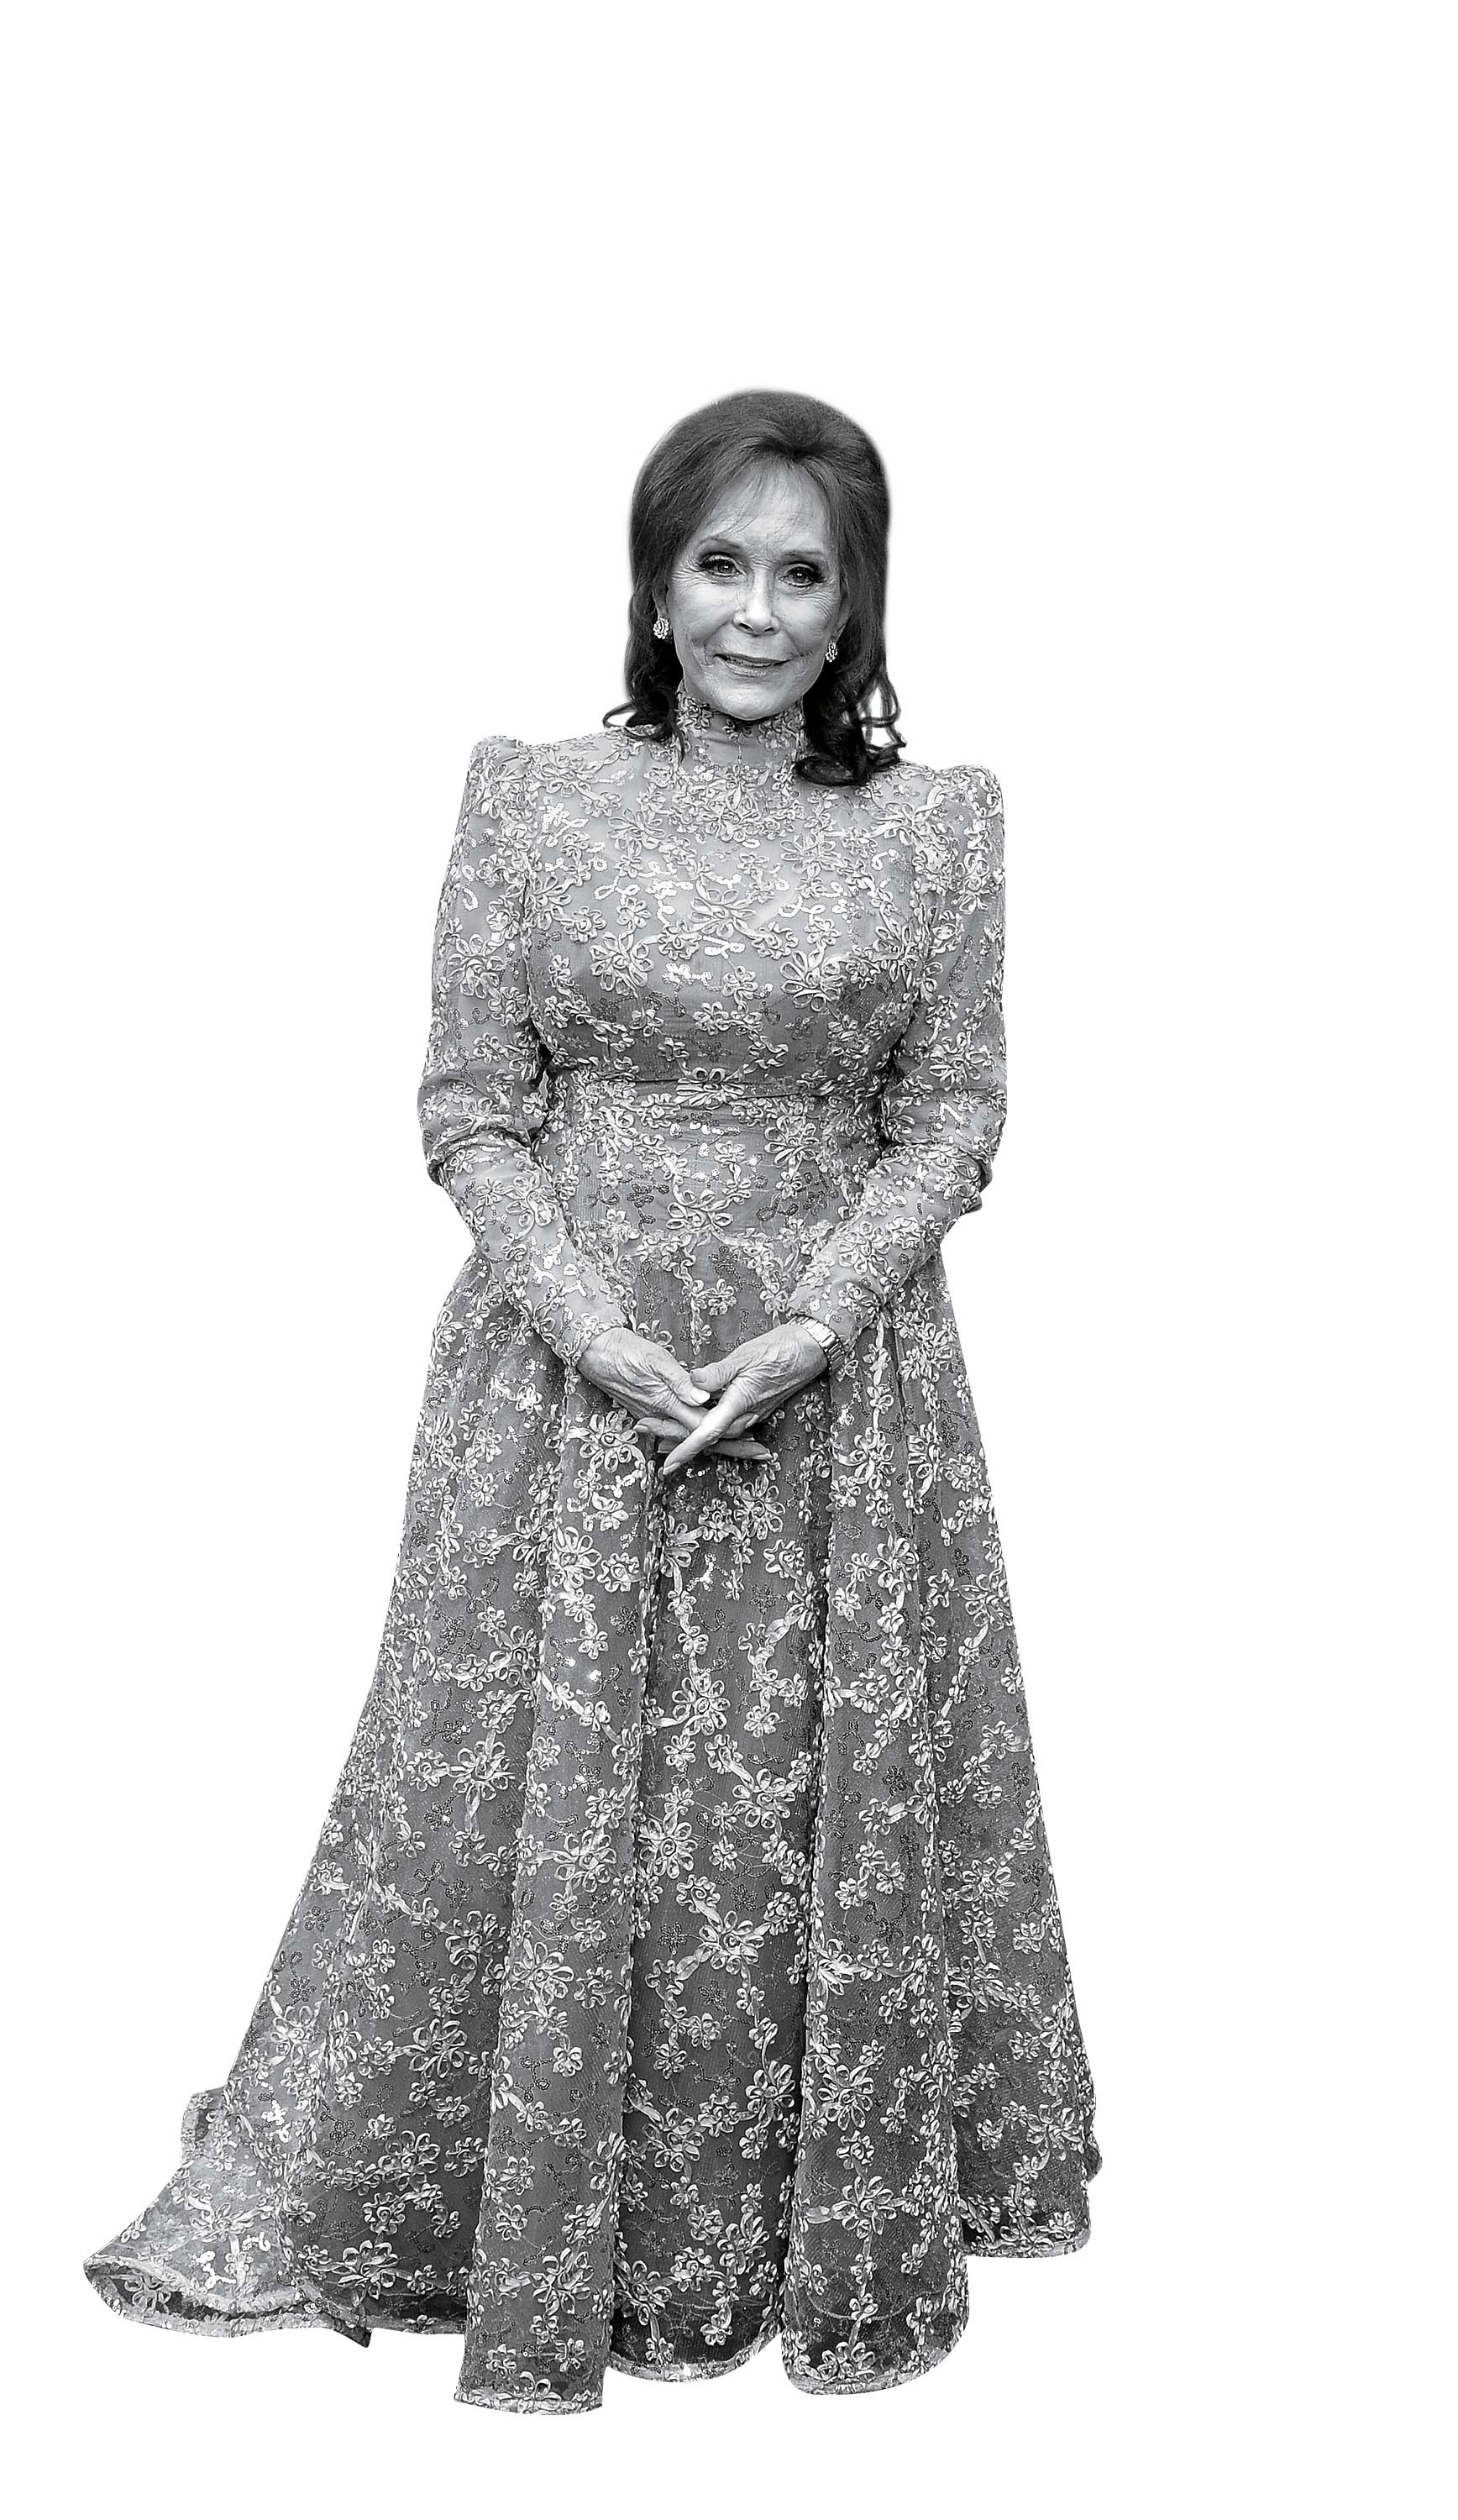 Loretta Lynn With her first album in 12 years and a new PBS documentary about her life, the 83-year-old coal miner’s daughter isn’t slowing down (Getty Images)